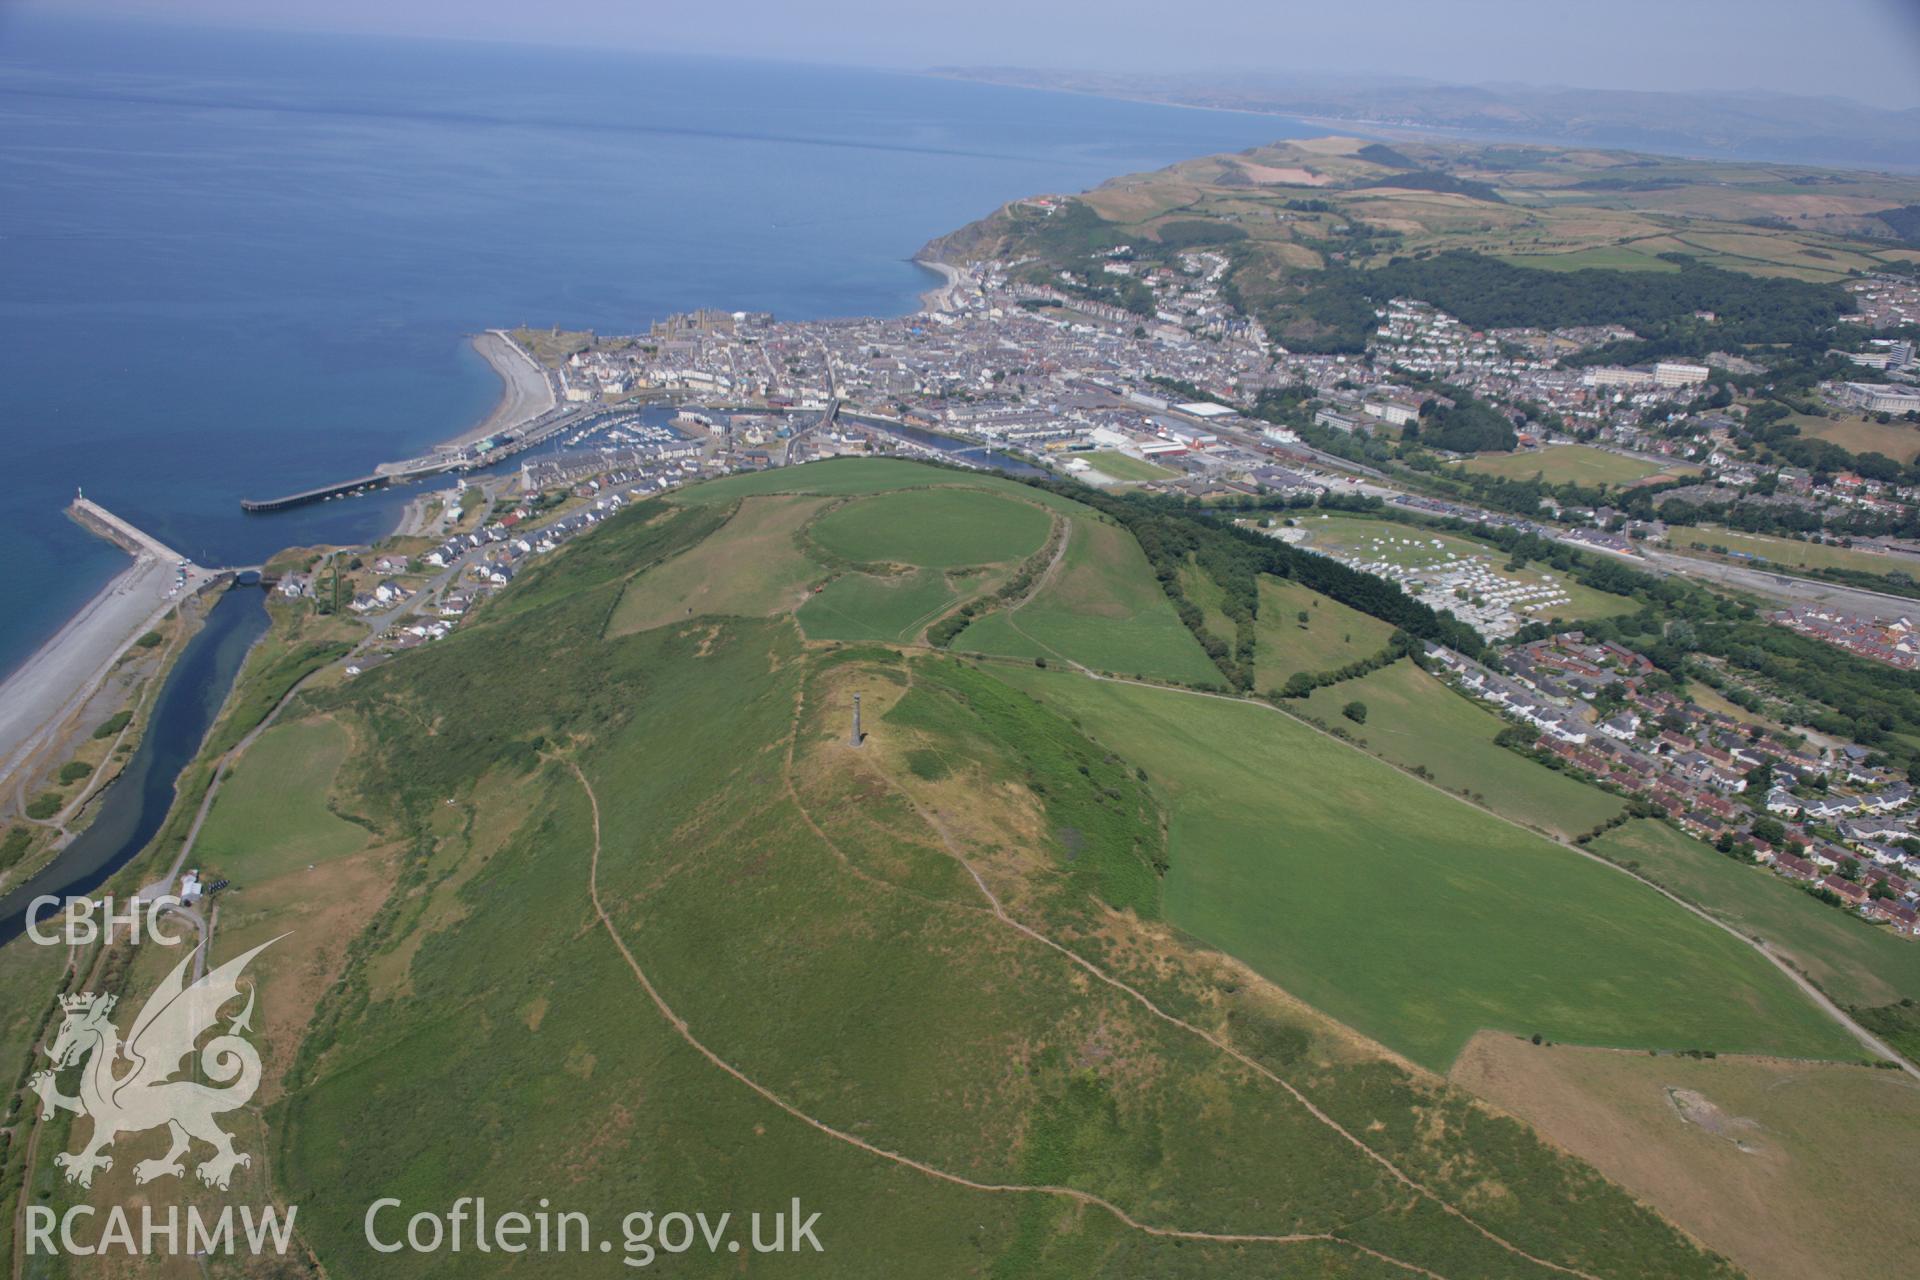 RCAHMW colour oblique aerial photograph of Pen Dinas Hillfort, Aberystwyth. Taken on 17 July 2006 by Toby Driver.